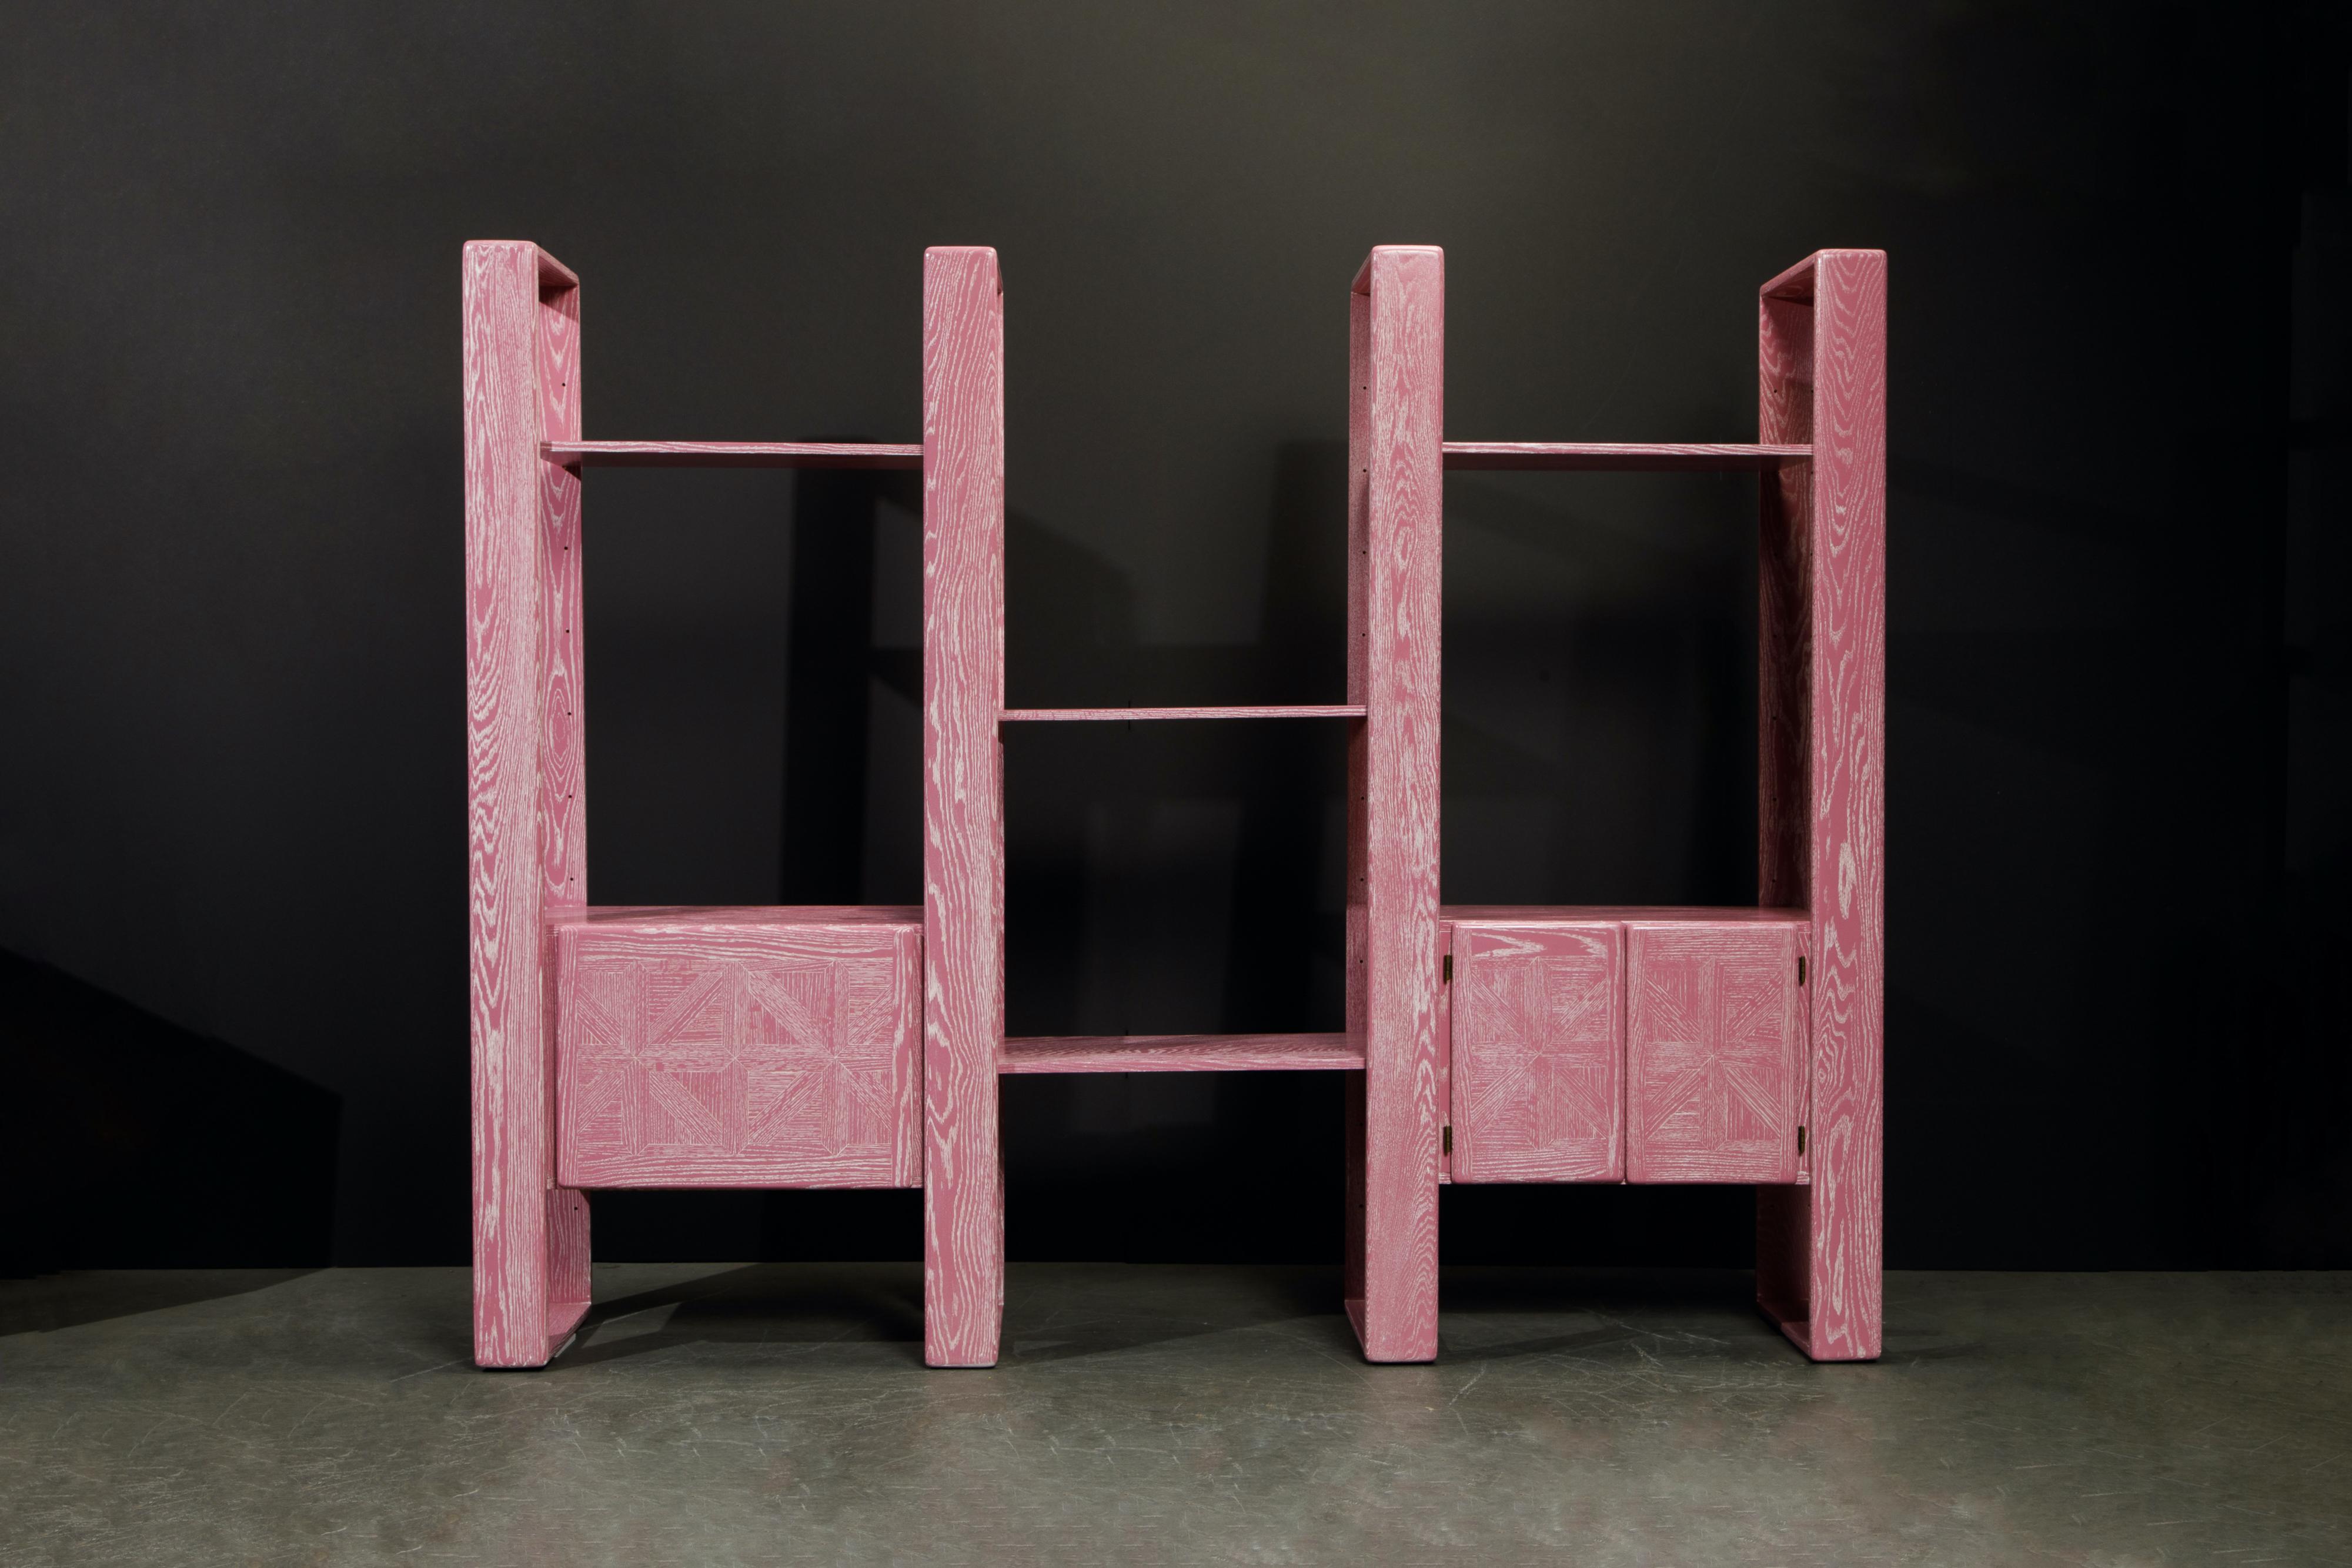 This absolute show-stopper modular bookcase refinished in gorgeous pink cerused oak is by Lou Hodges, designed and produced in California in the 1970s. You can configure this modular set in so many ways, also we have additional sections and shelves